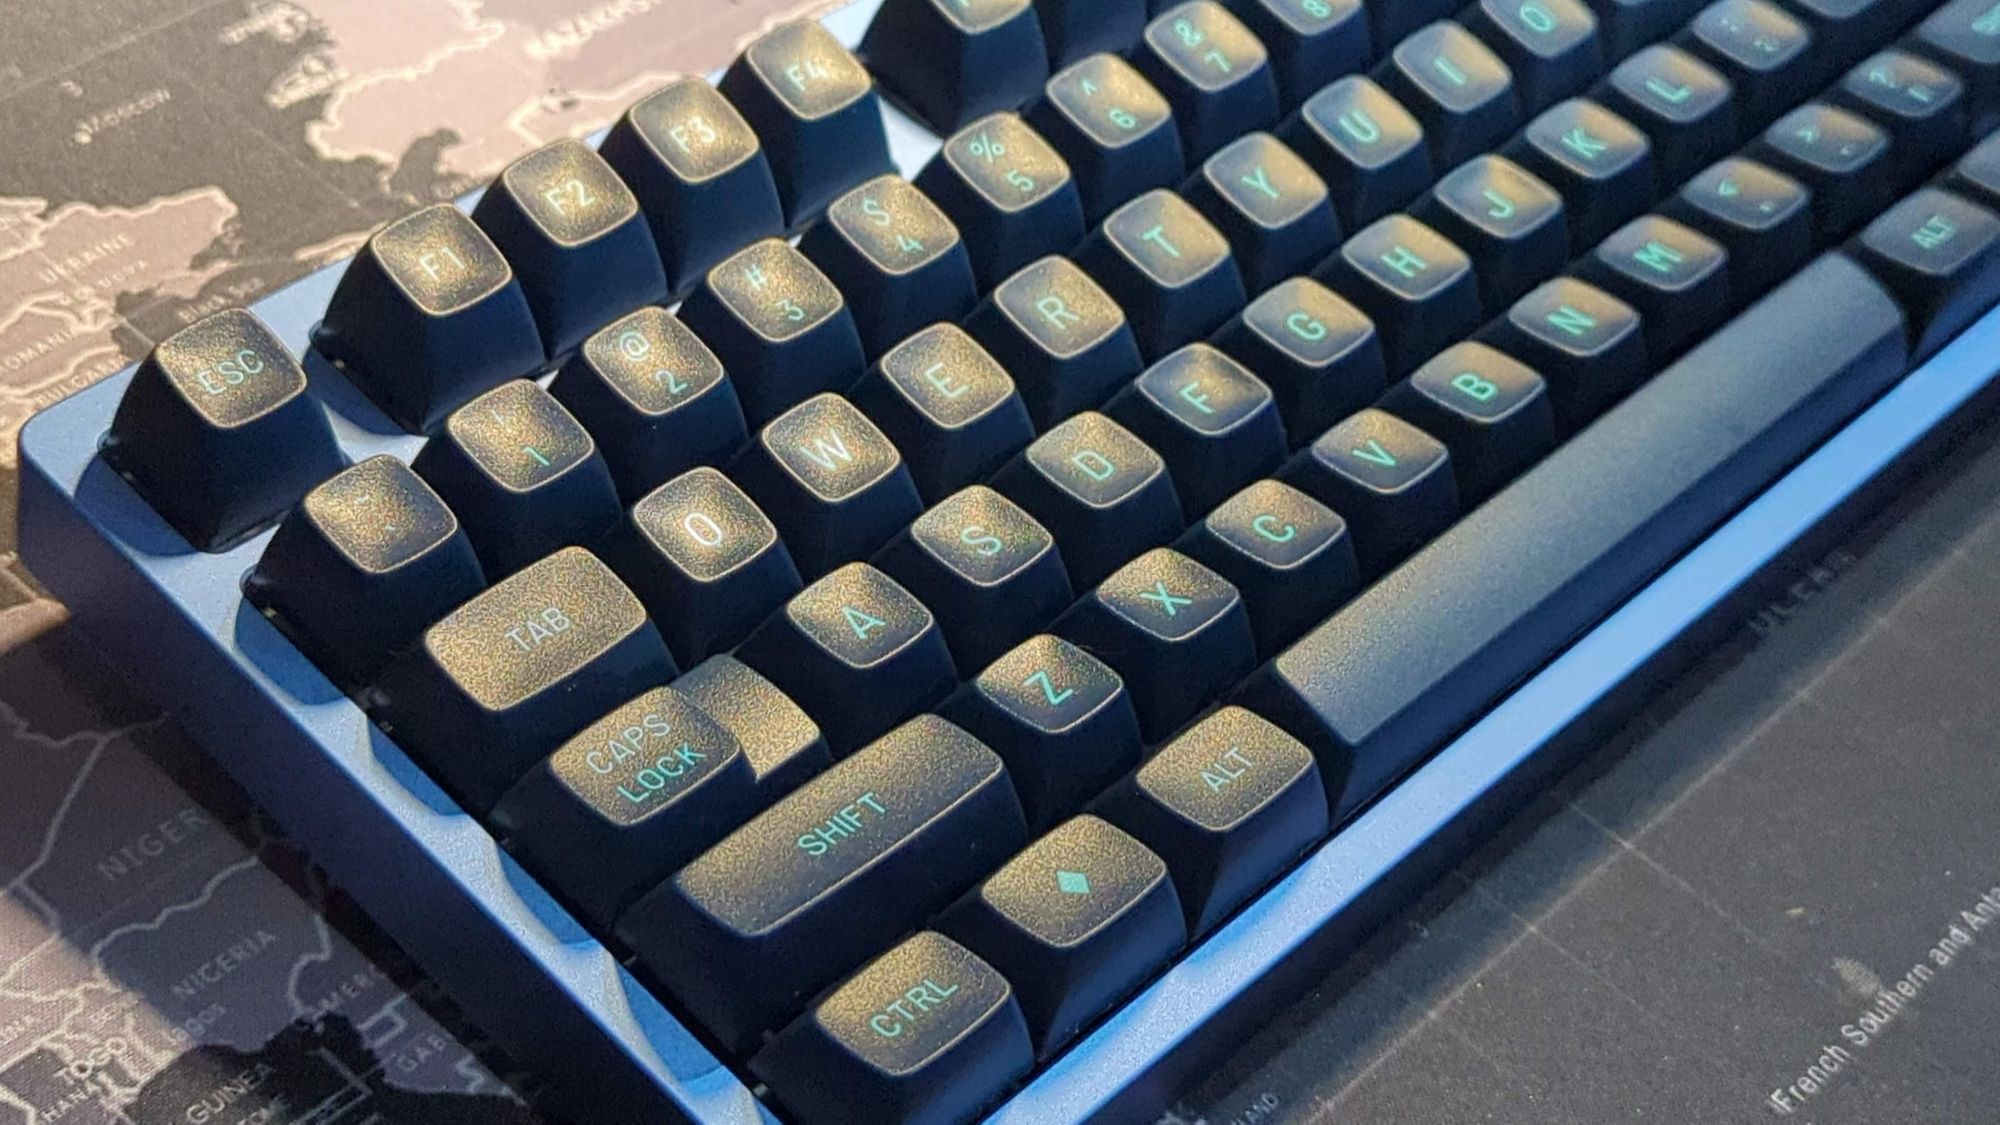 MKC75: Custom Keyboard Features, Budget Price Tag! Could This Be The Budget Aluminum Keyboard King?